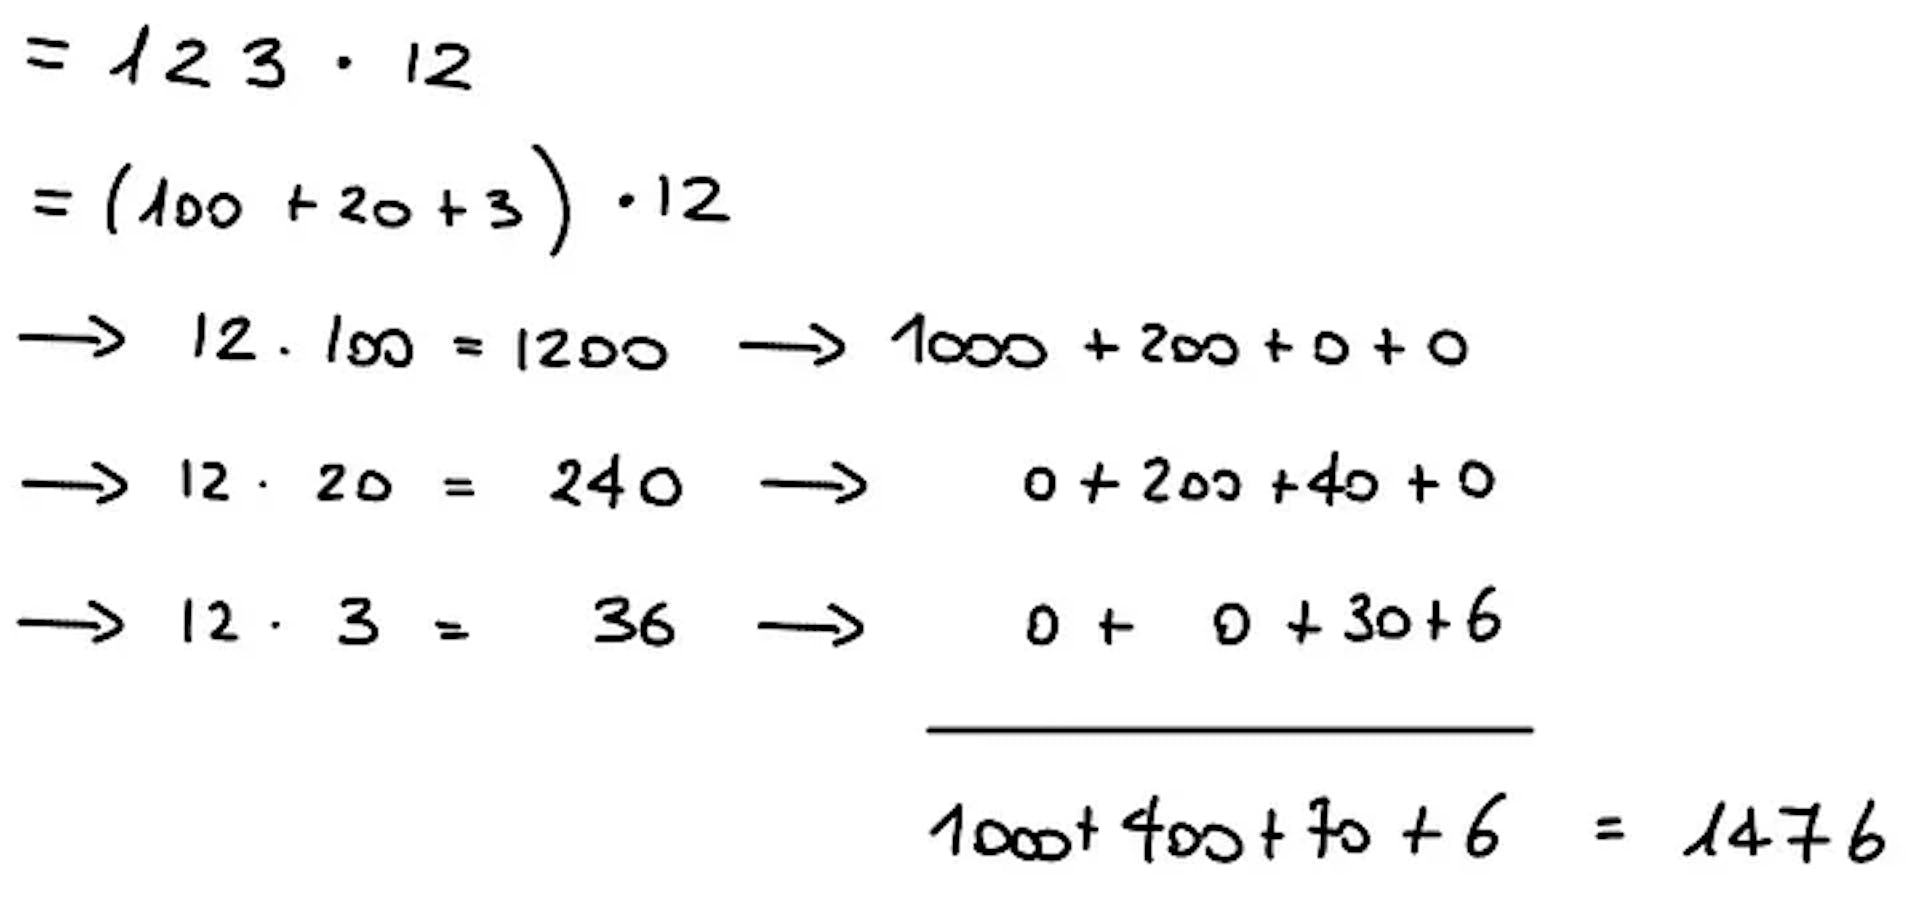 Decomposition of the product of 123 x 12